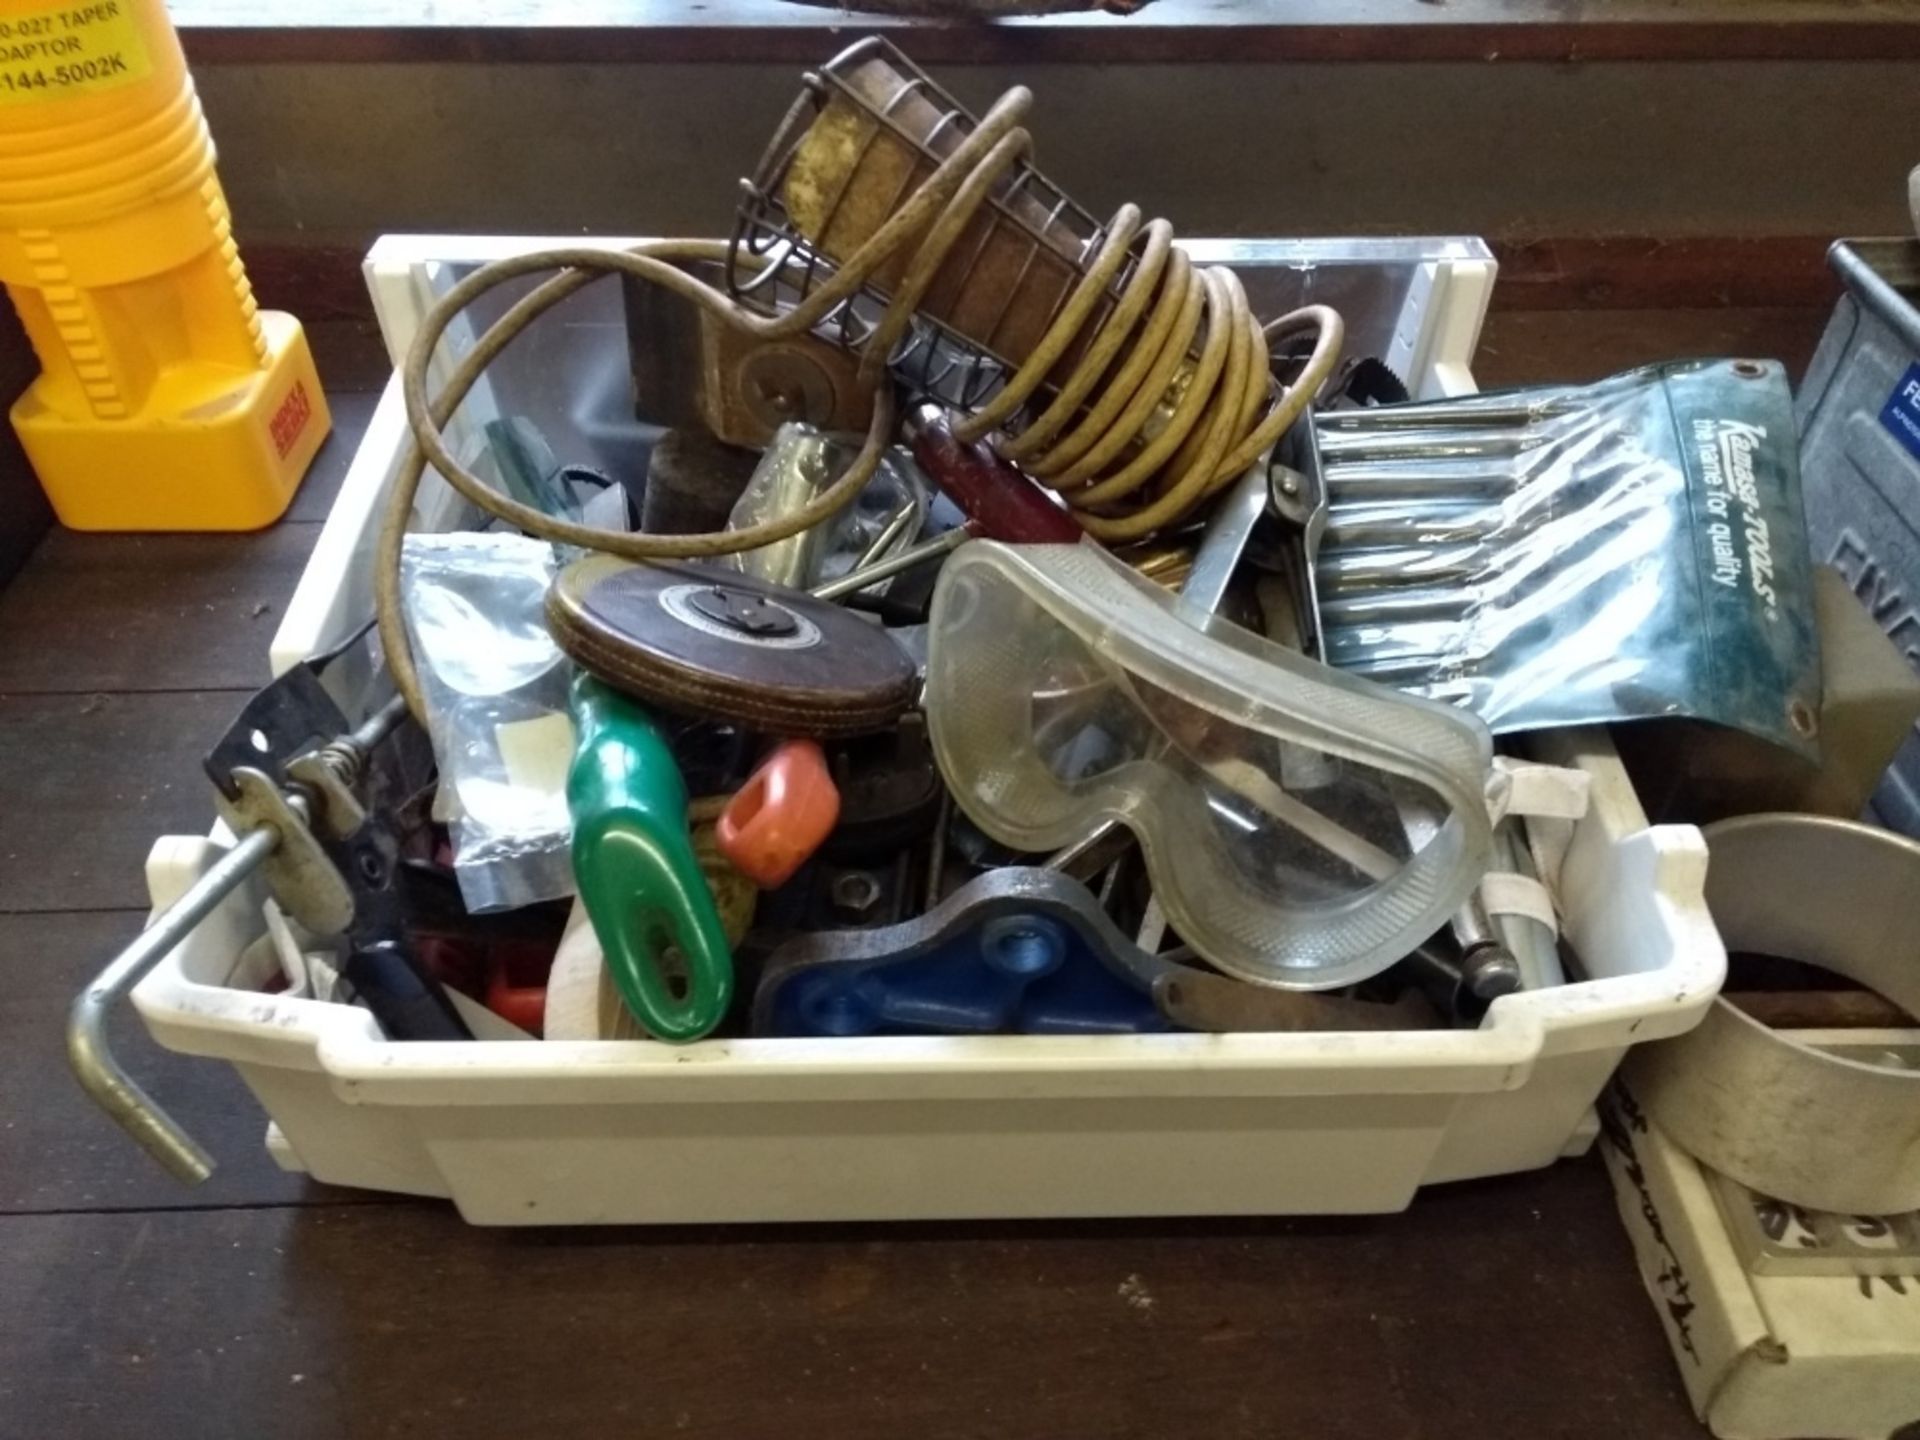 Box of files, spanners, grips, wraparound goggles, clamps, clip on lamp,